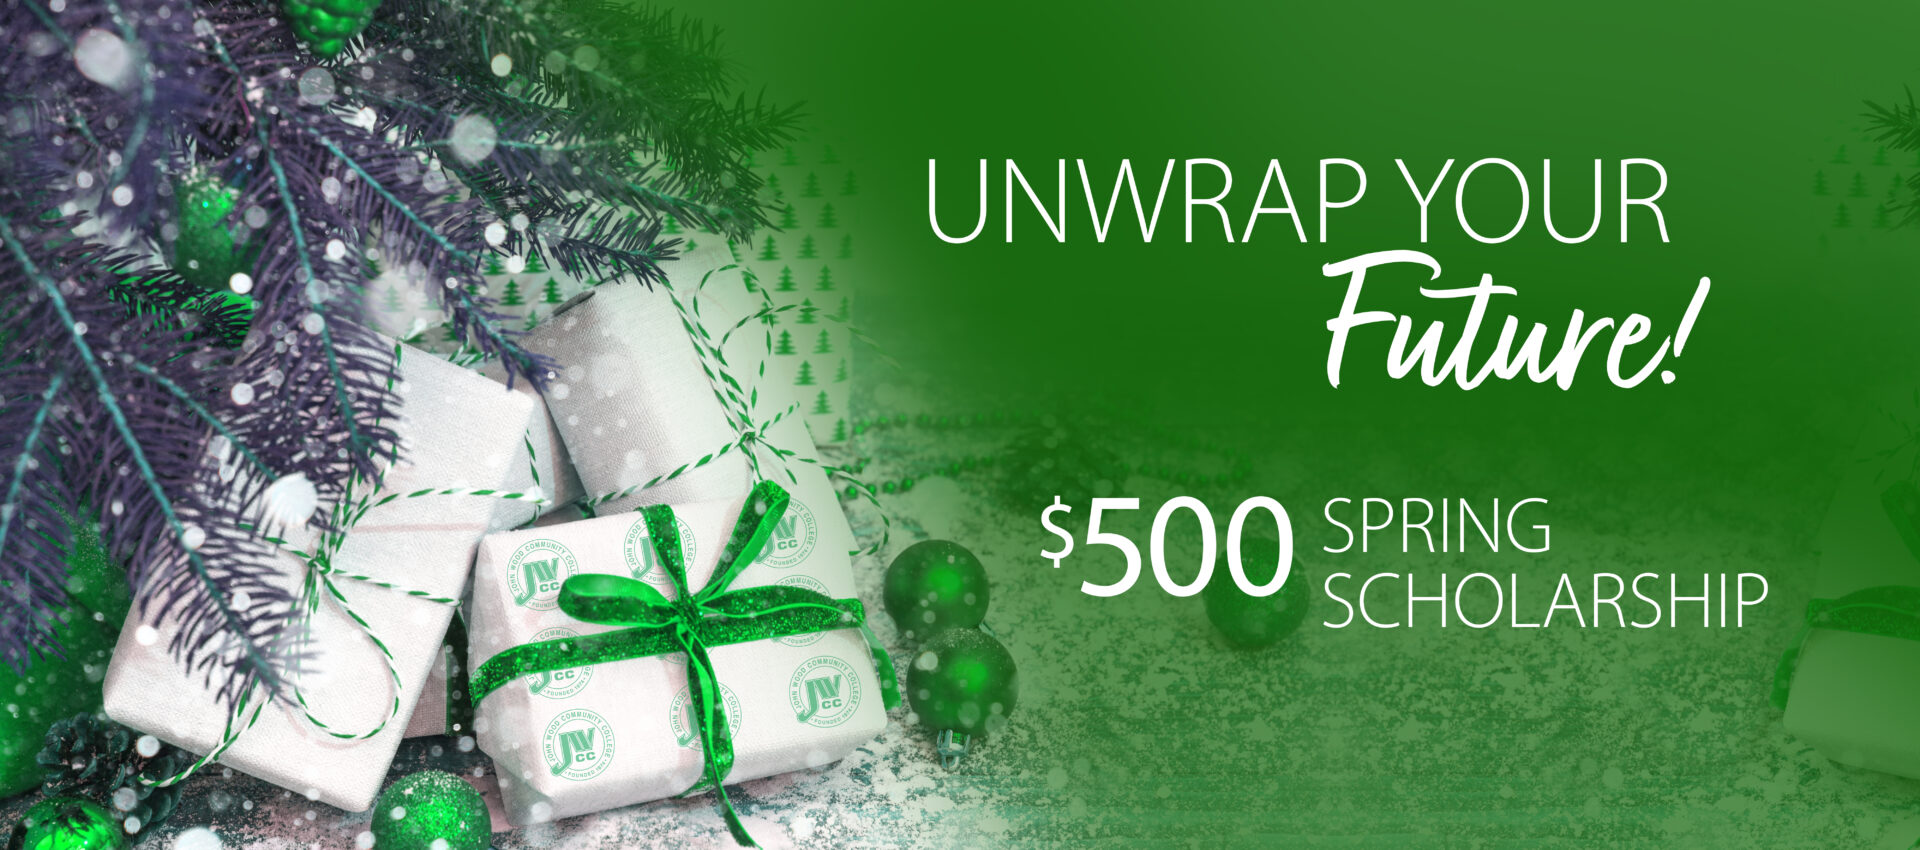 Unwrap Your Future with a $500 Spring Scholarship